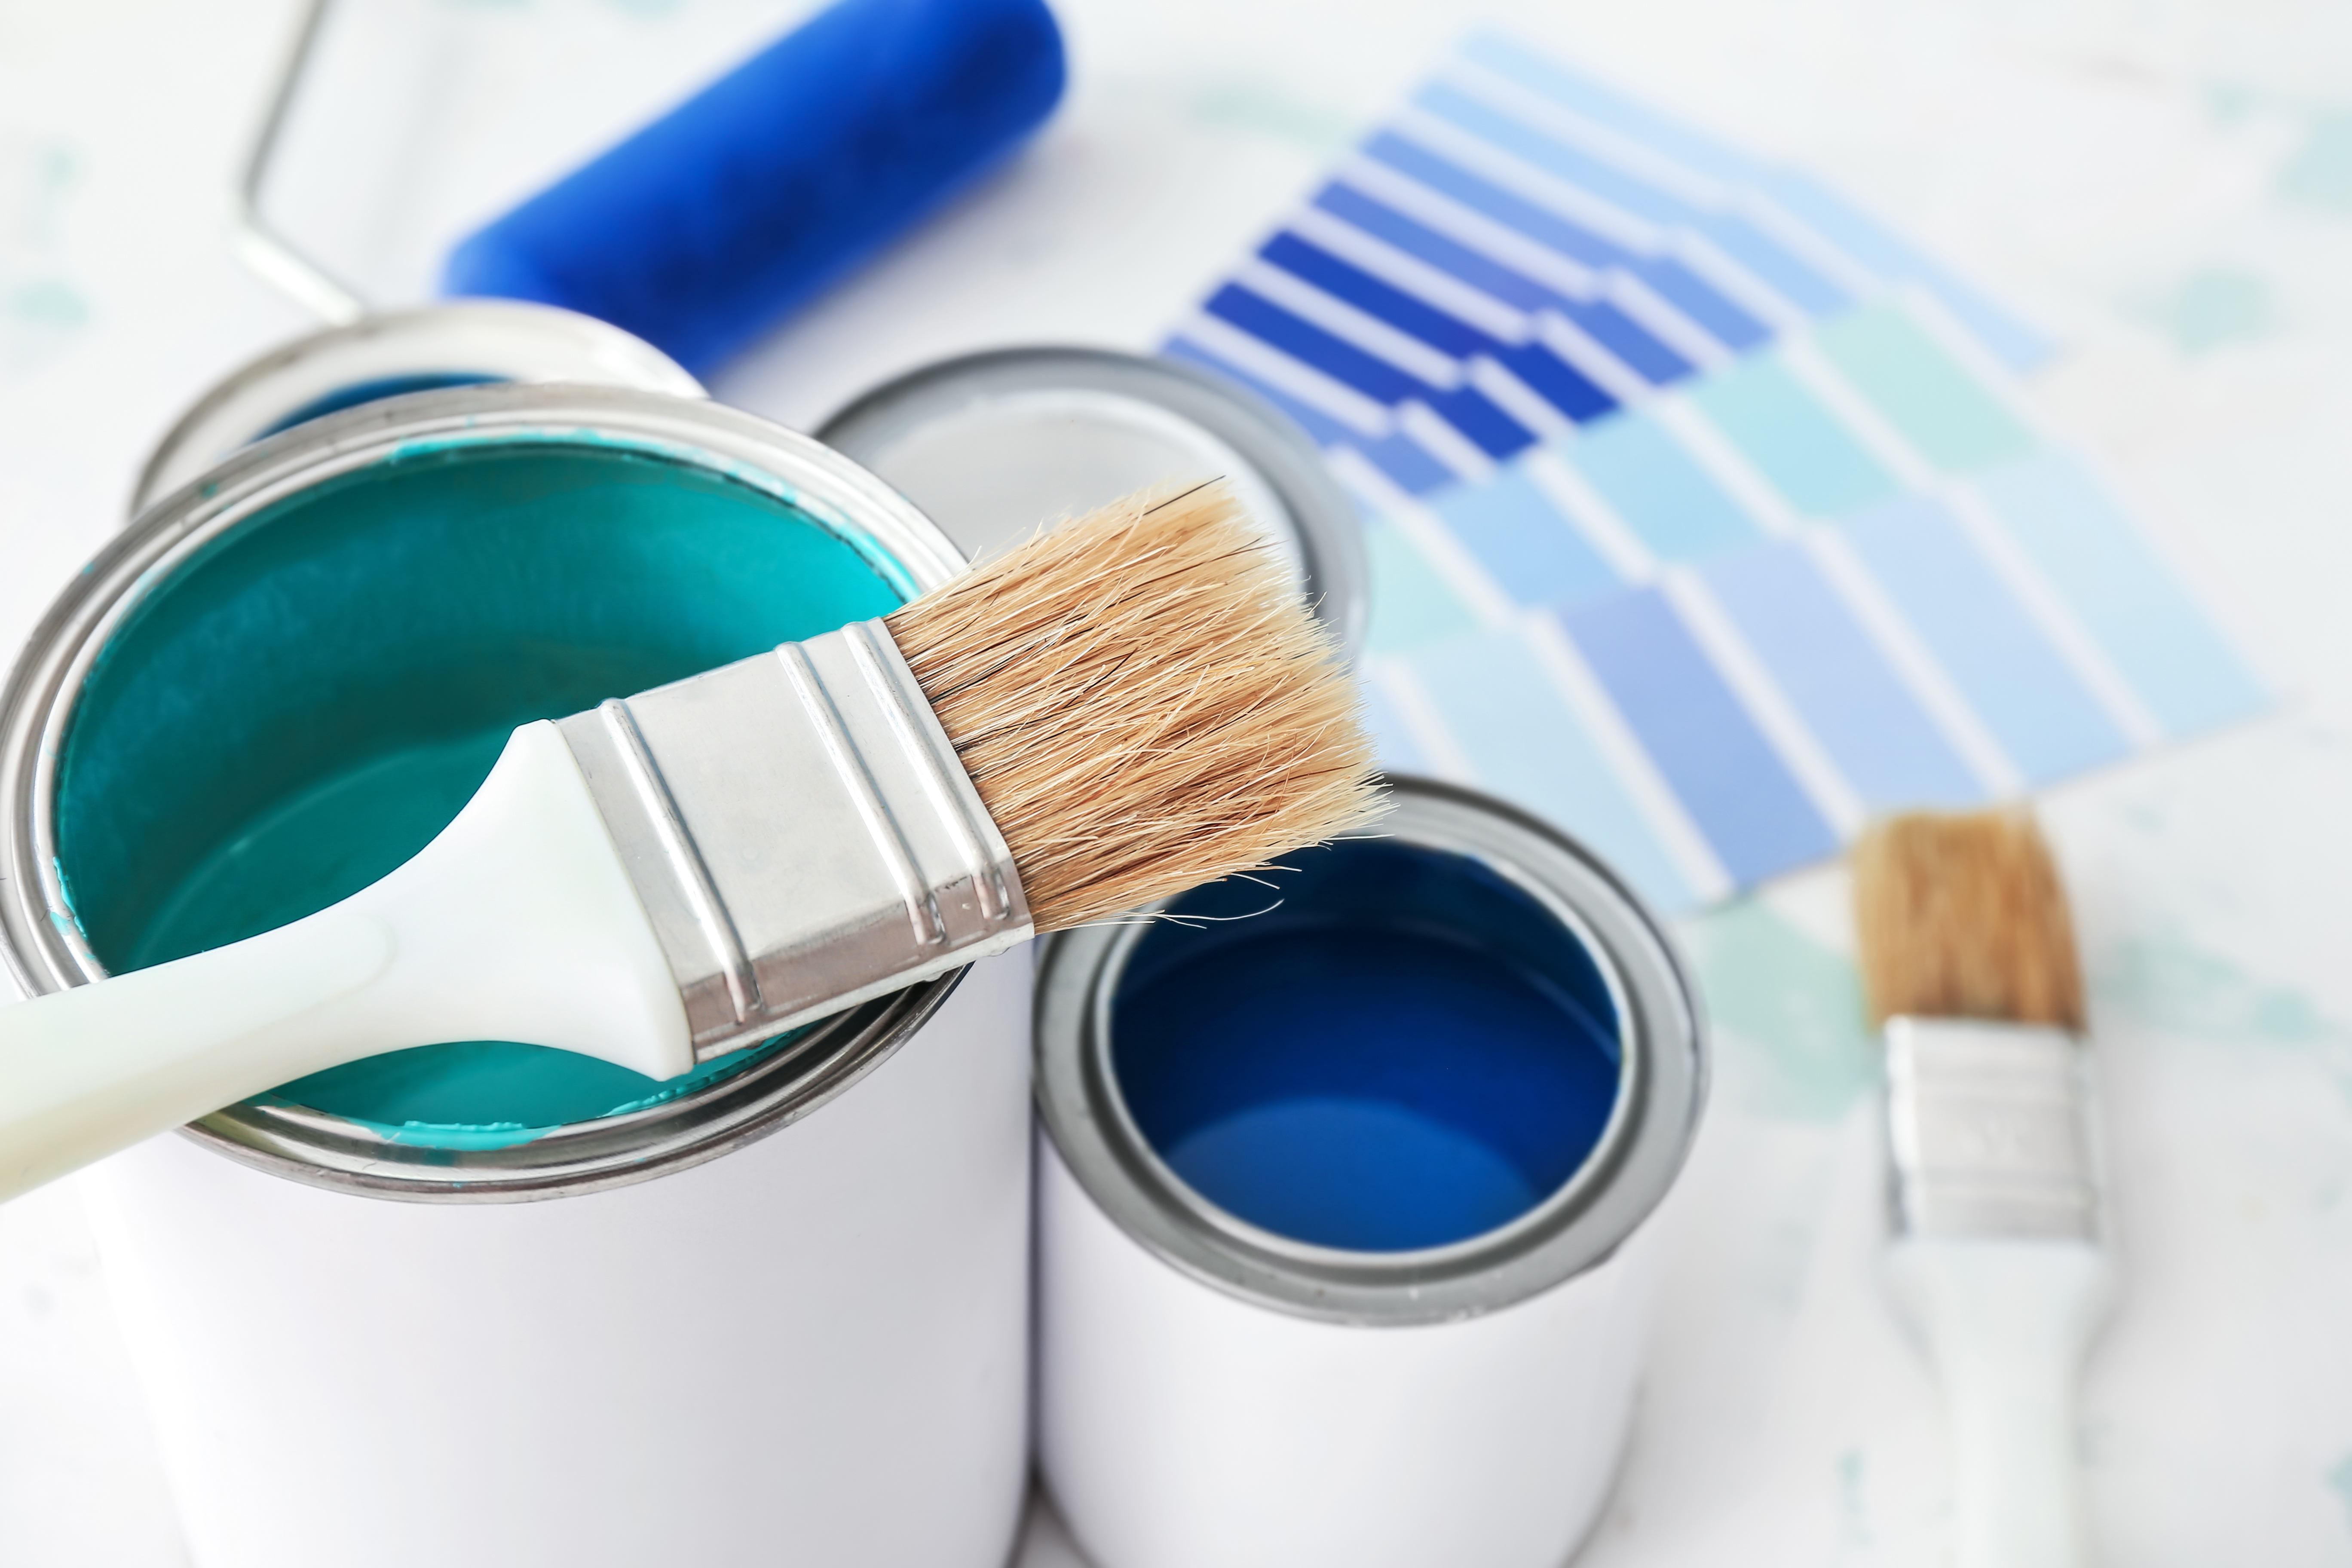 Paint is easy. Cans, brushes and swatches hint at the fun.